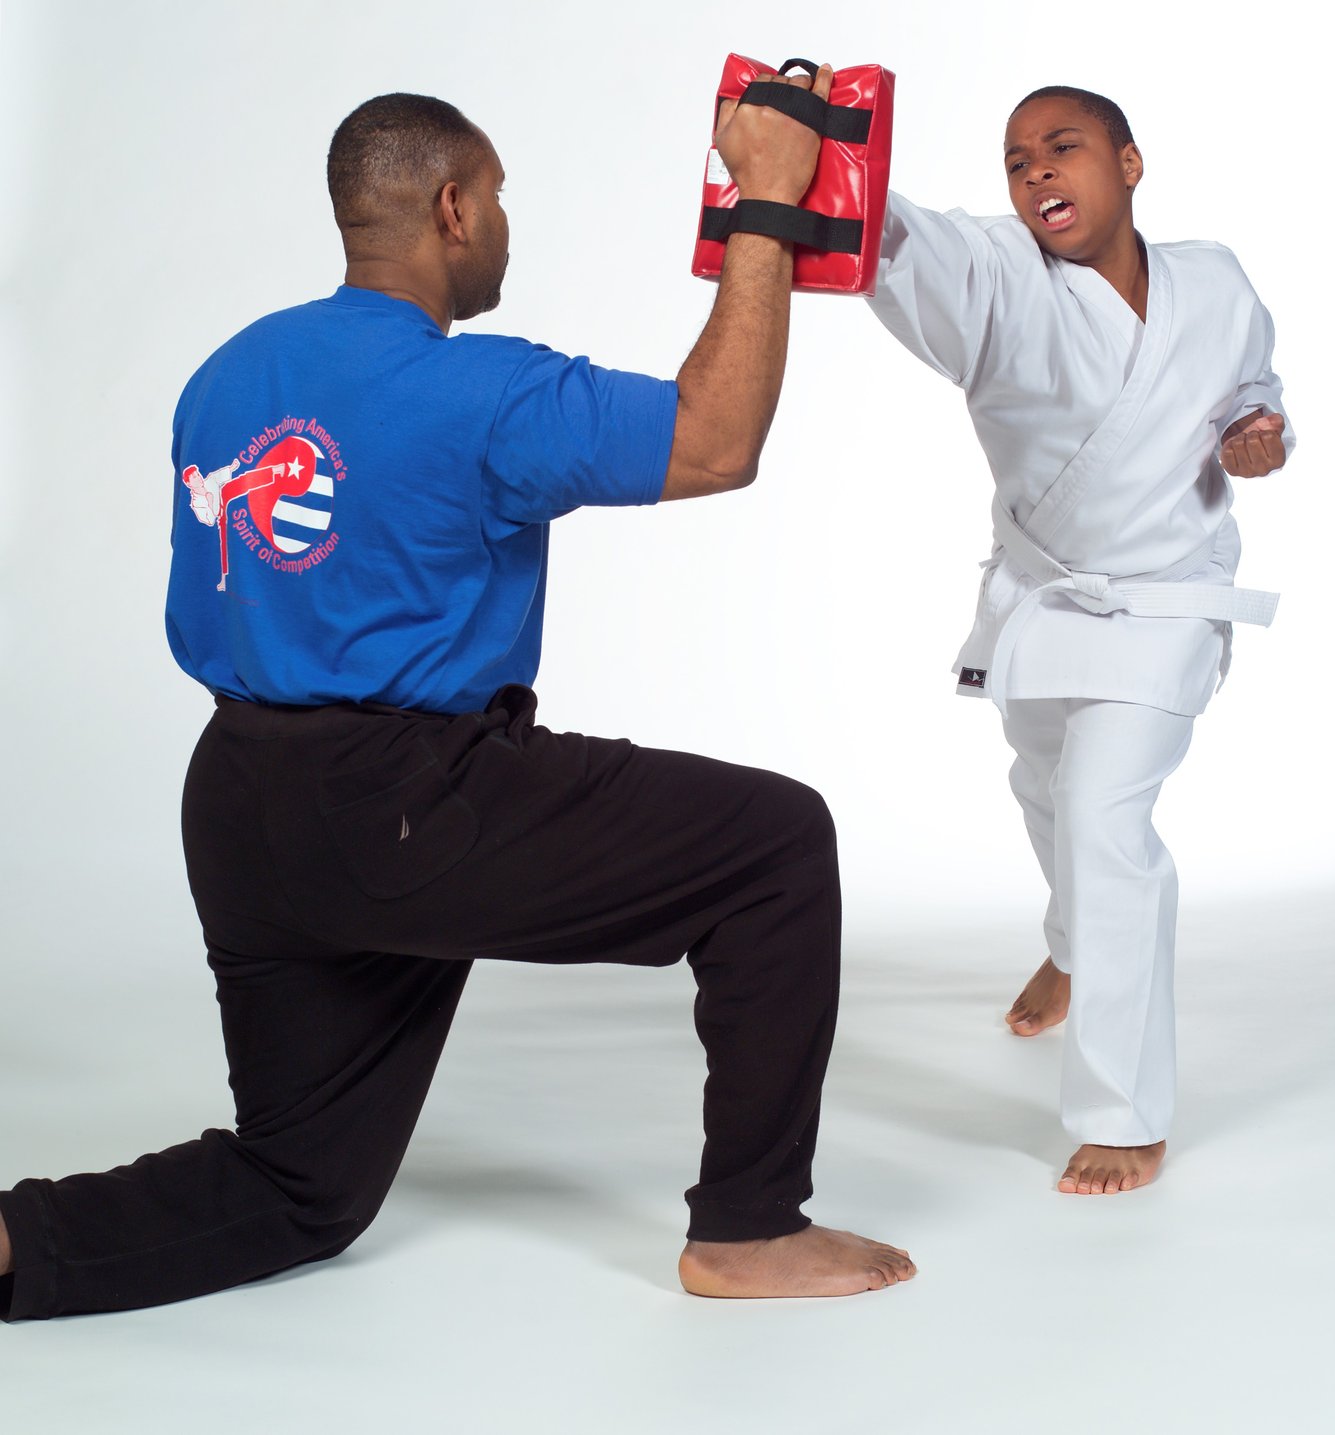 HOW TO ENCOURAGE YOUR CHILD’S SUCCESS IN MARTIAL ARTS